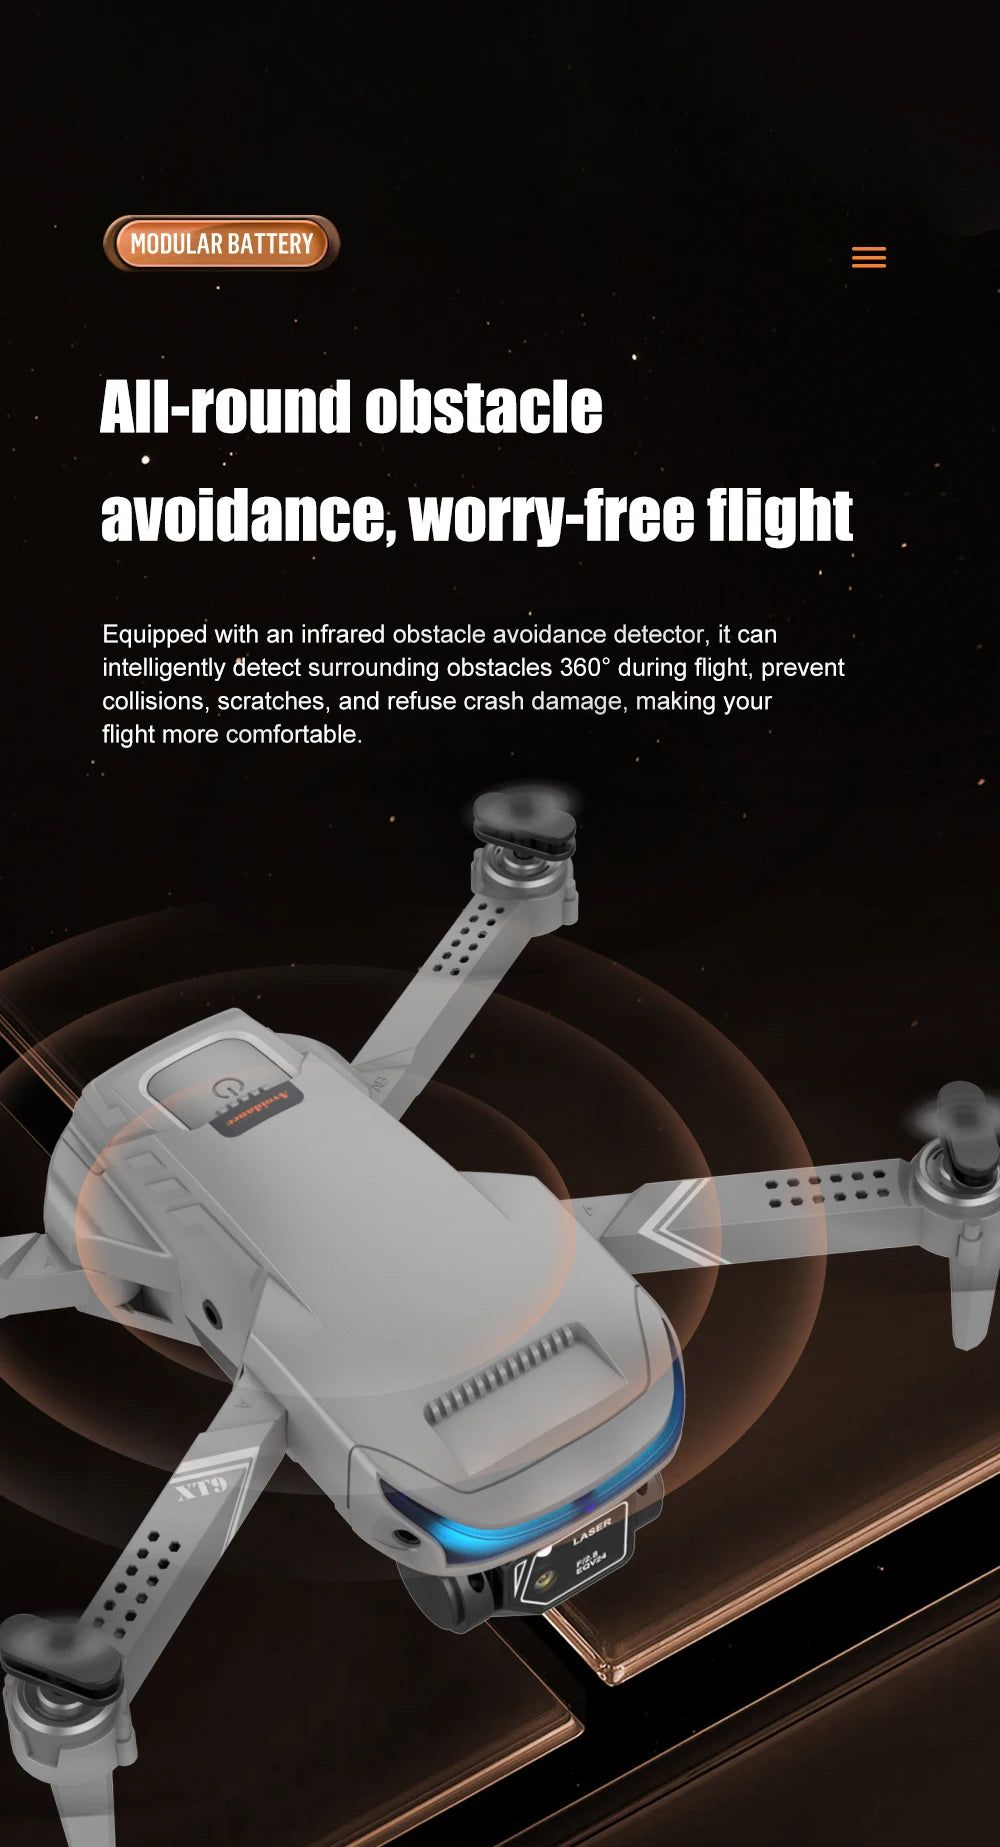 XT9 Mini Drone, modular battery ail-round obstacle avoidance, worry-free